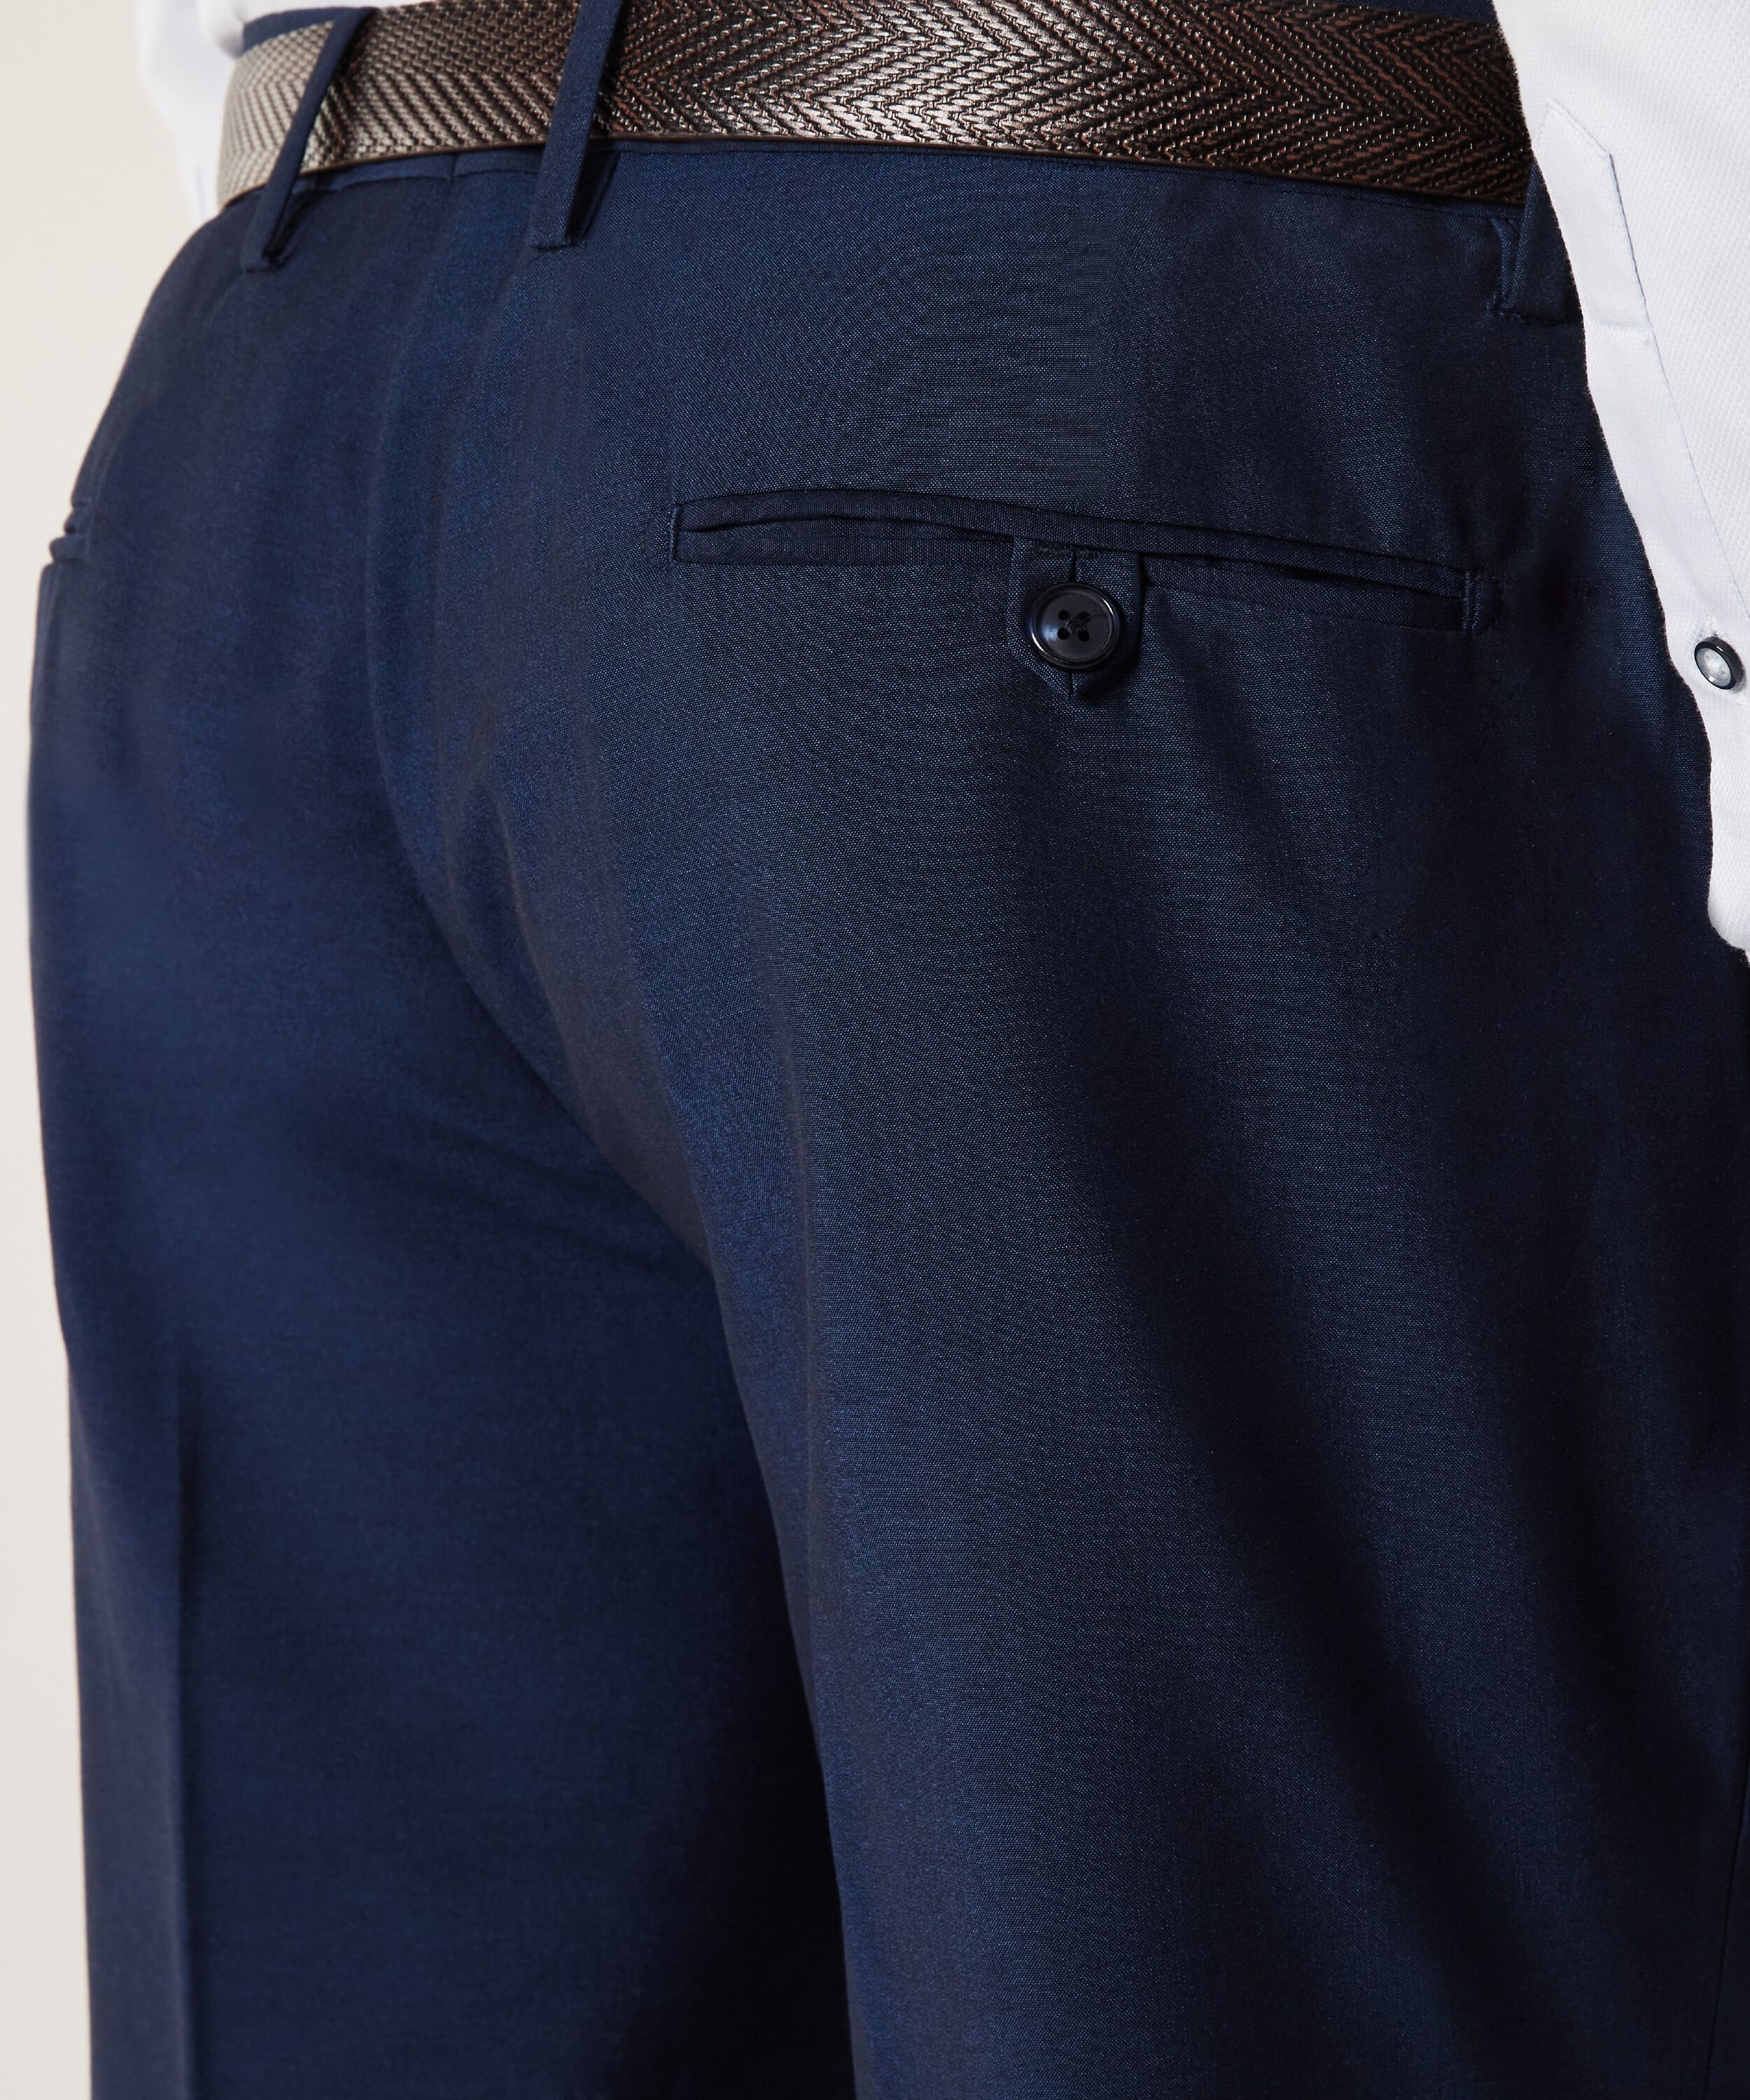 Slim Fit Two-Tone Tailored Pant - New Navy, Suit Pants